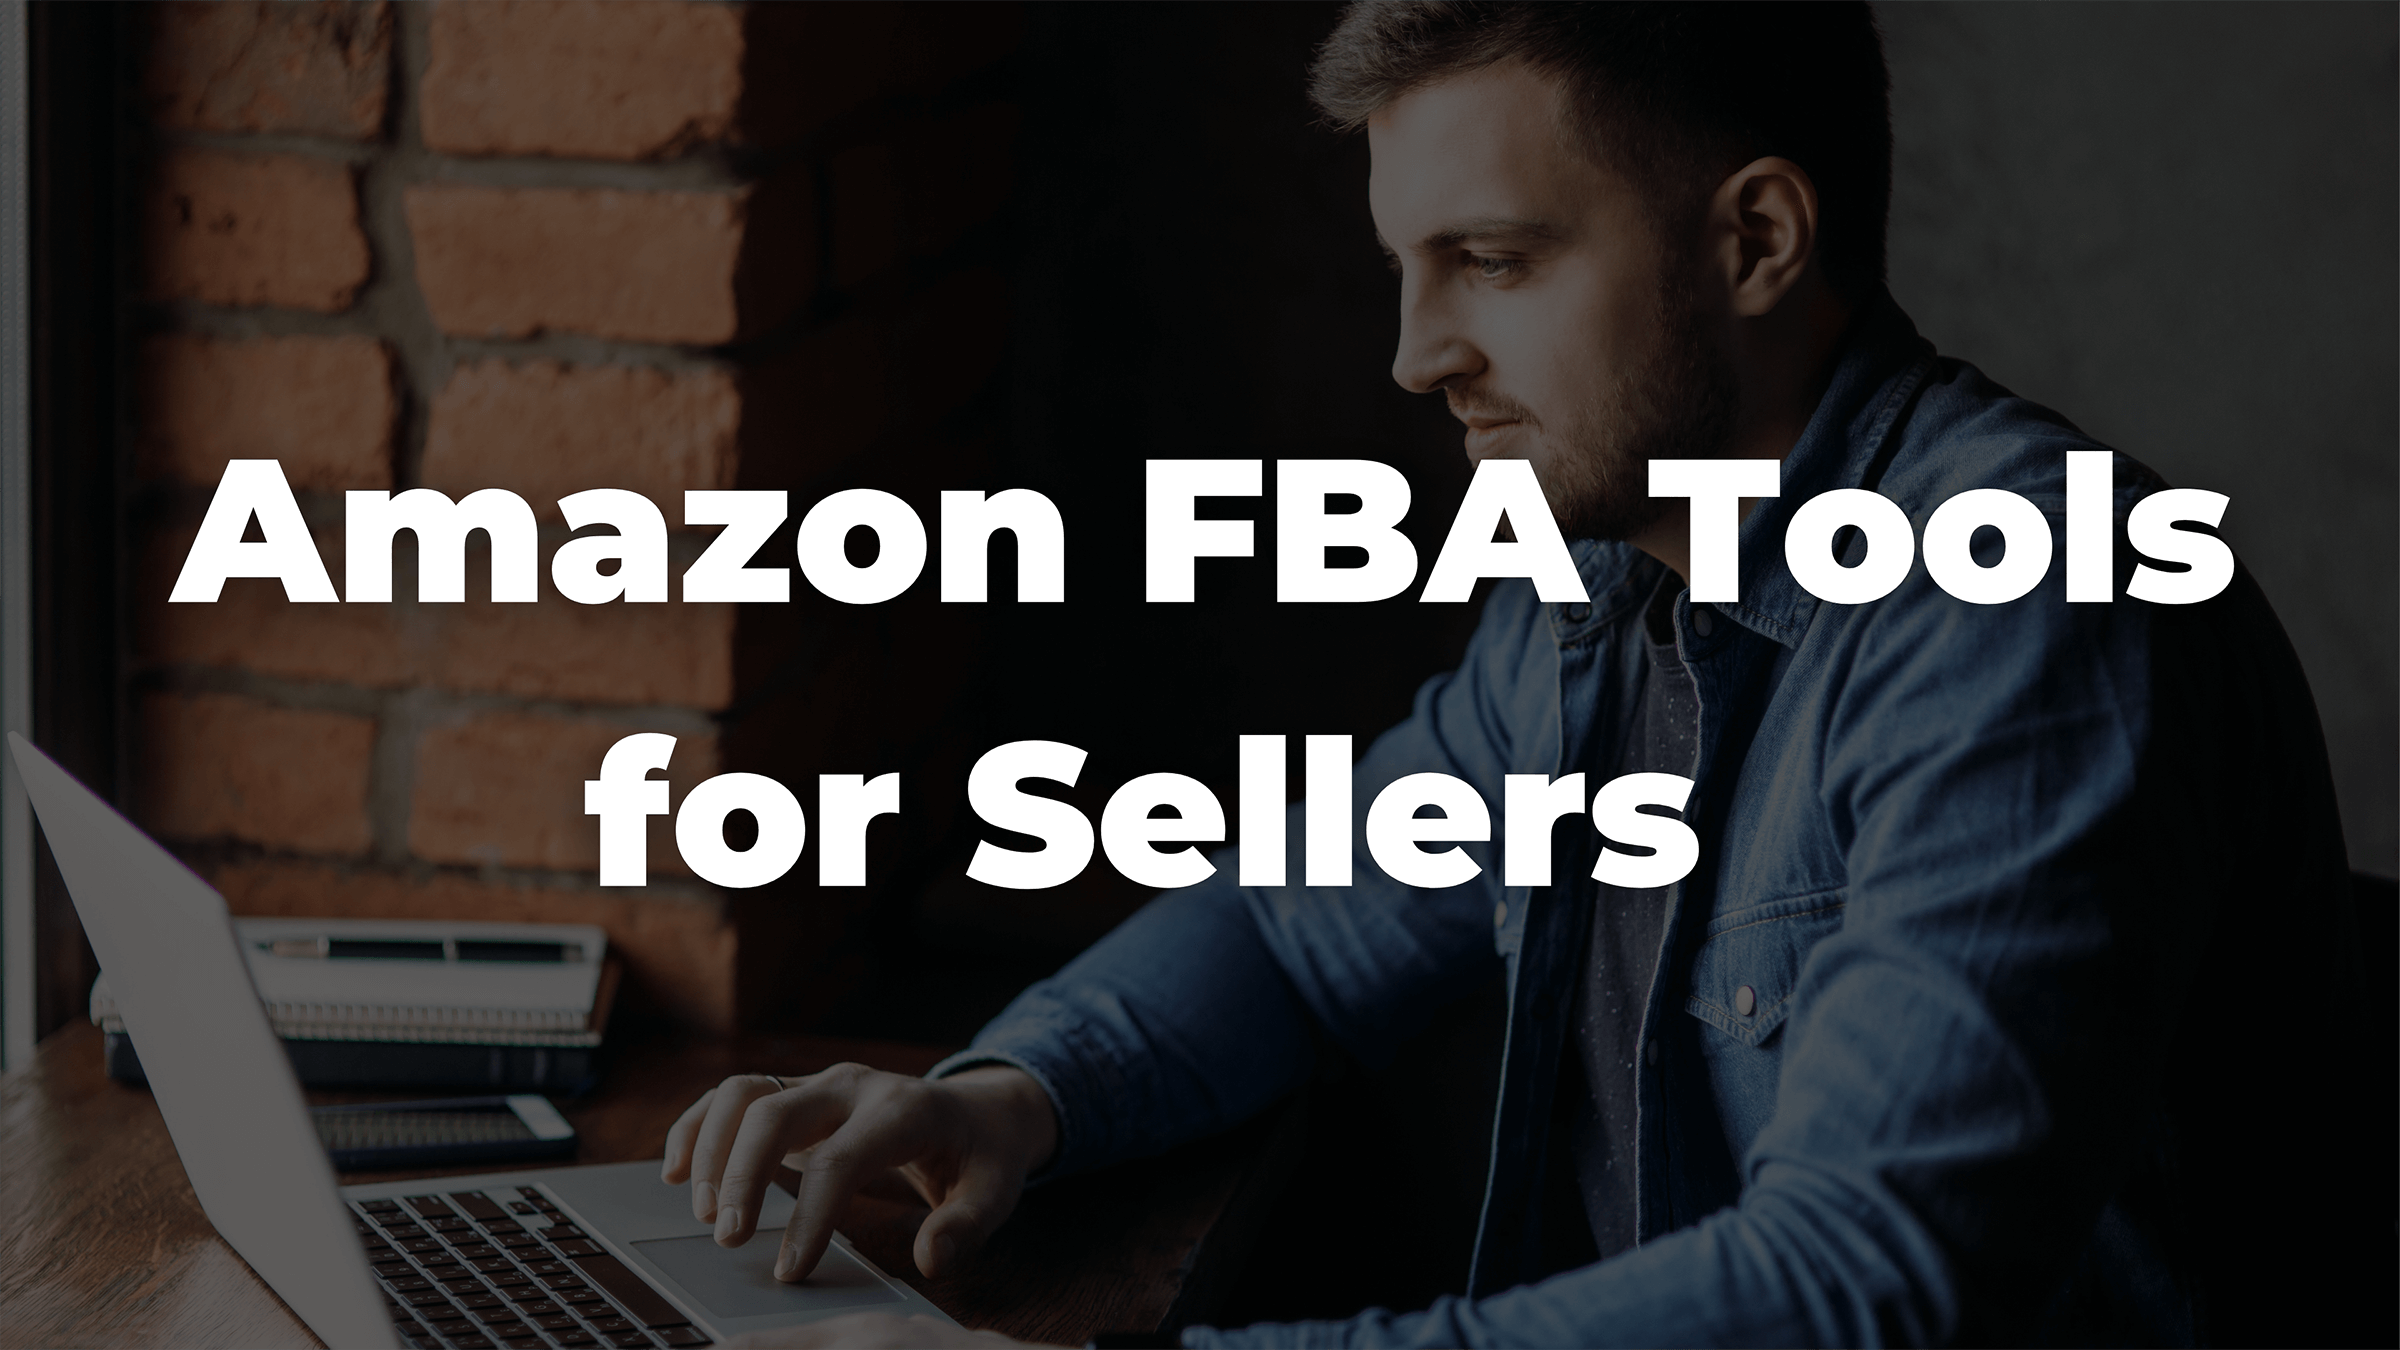 Amazon fba tools for sellers